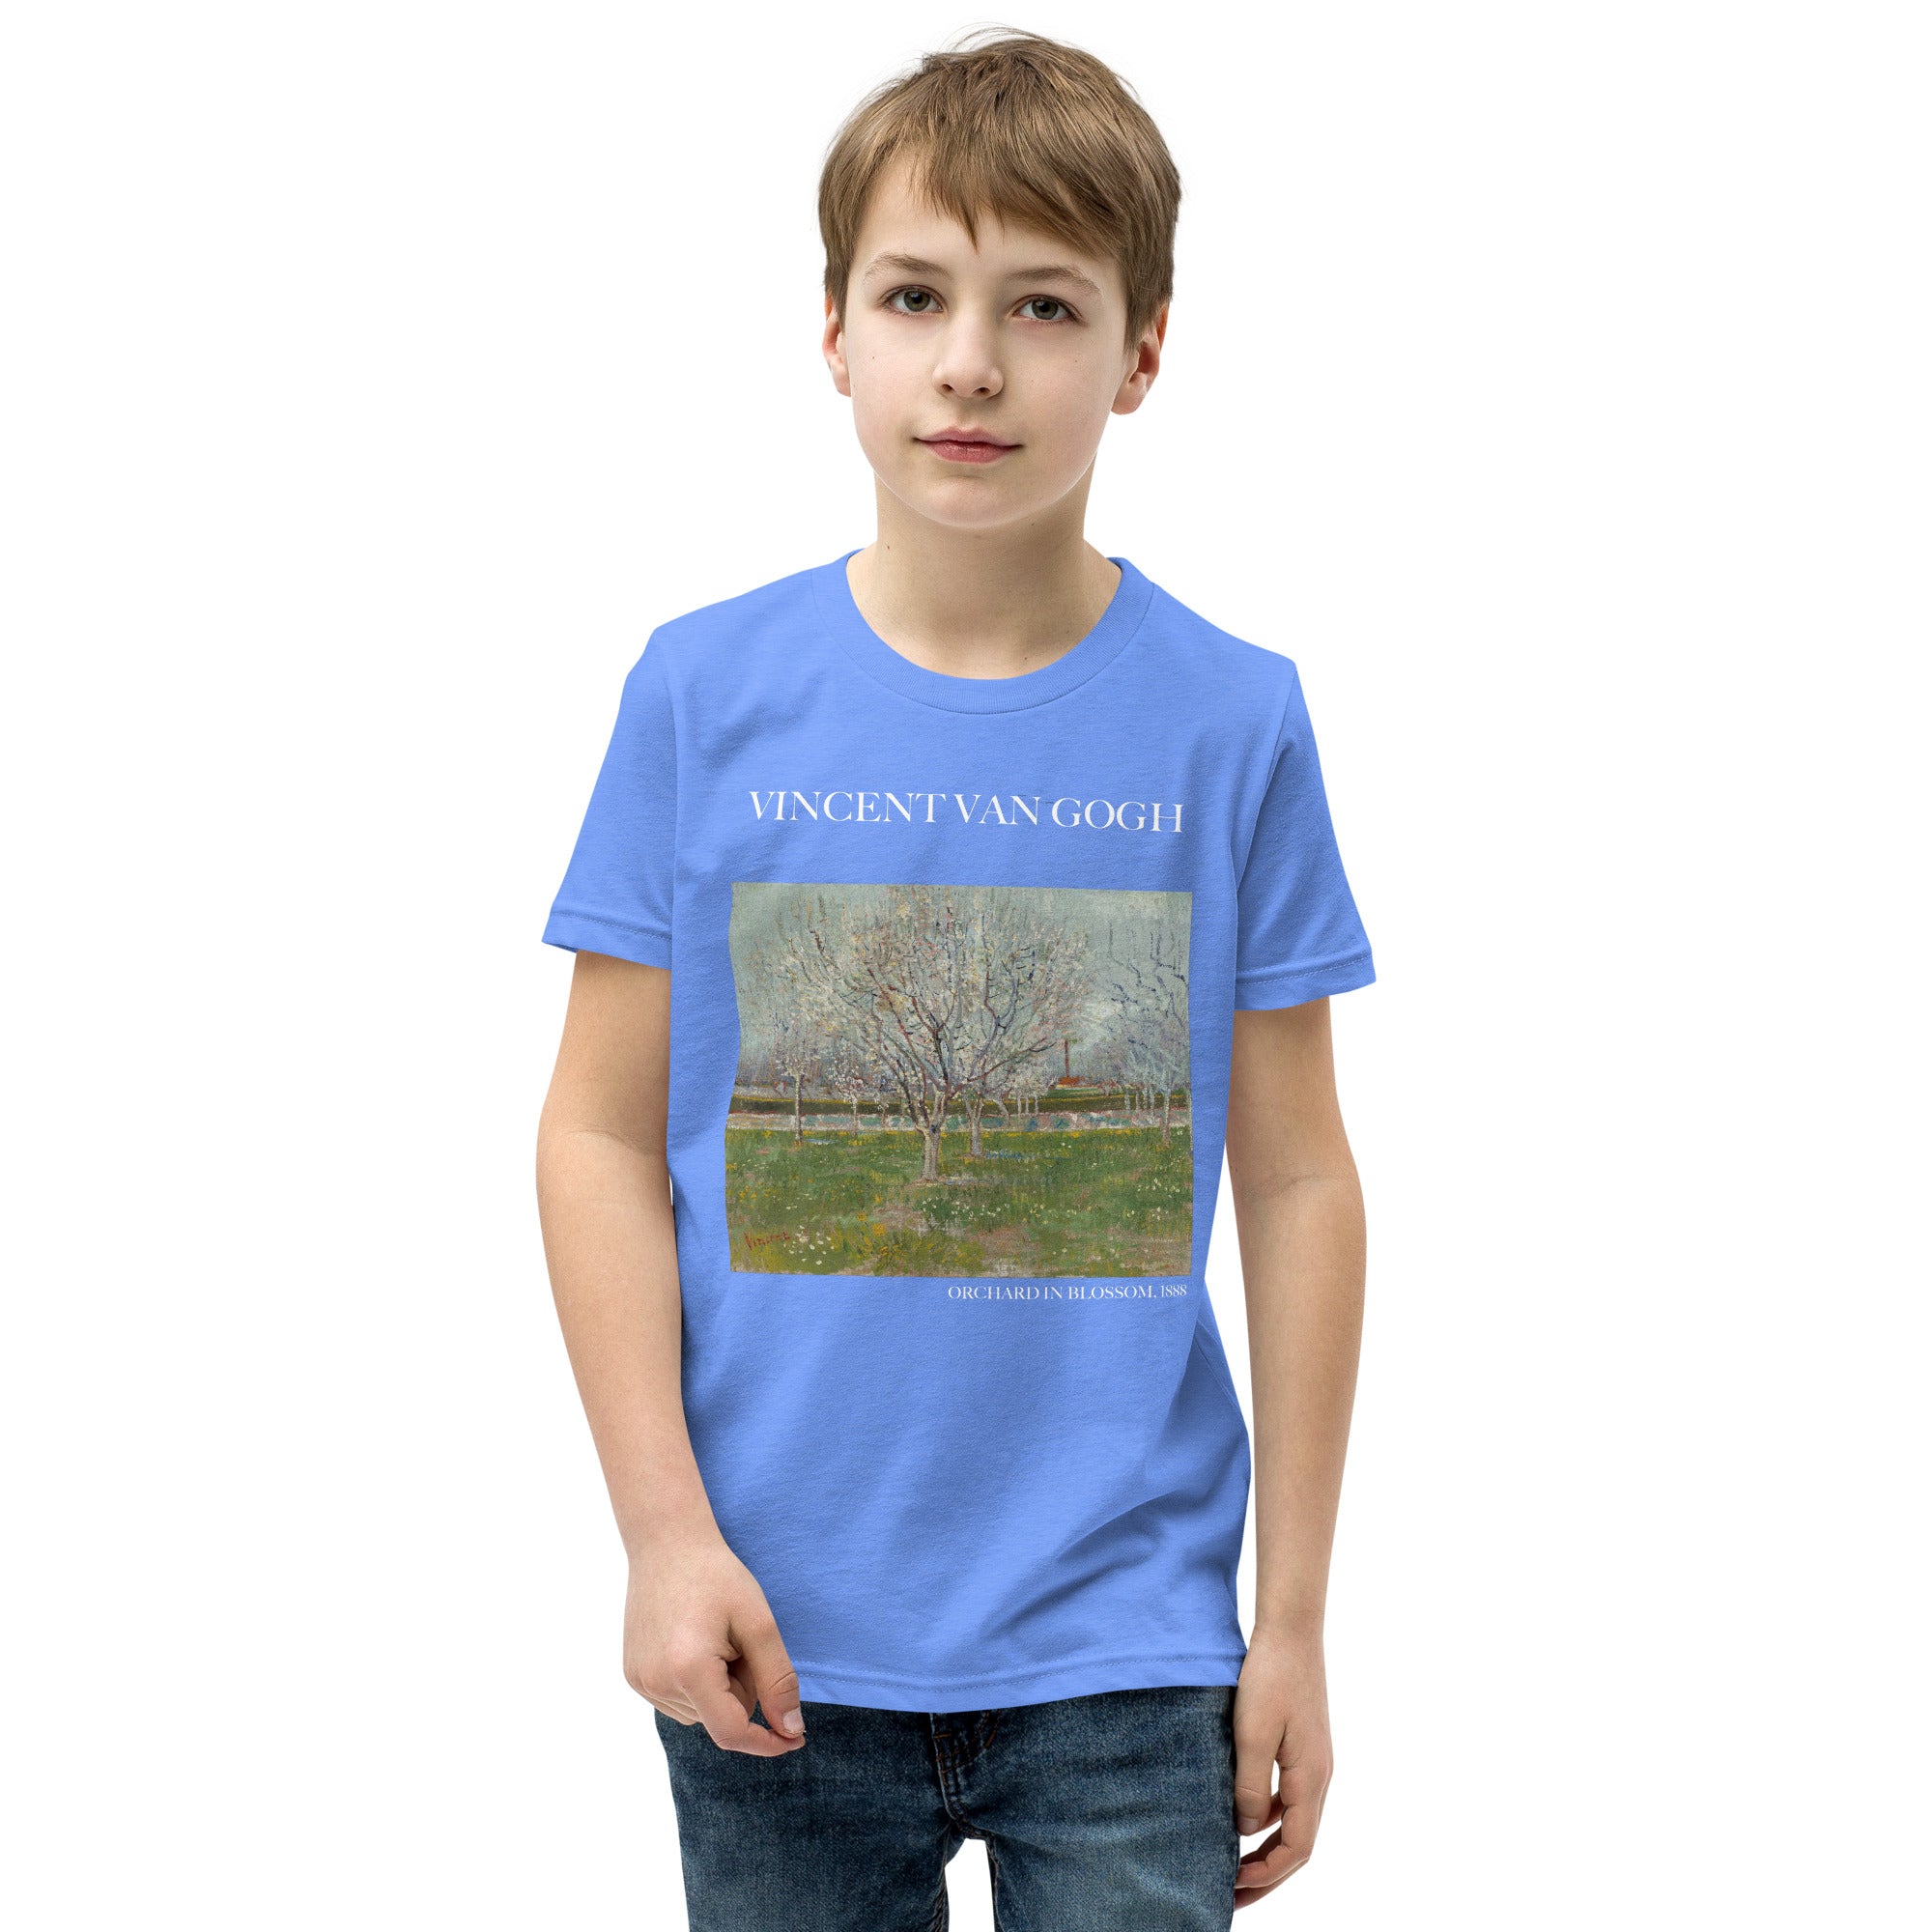 Vincent van Gogh 'Orchard in Blossom' Famous Painting Short Sleeve T-Shirt | Premium Youth Art Tee